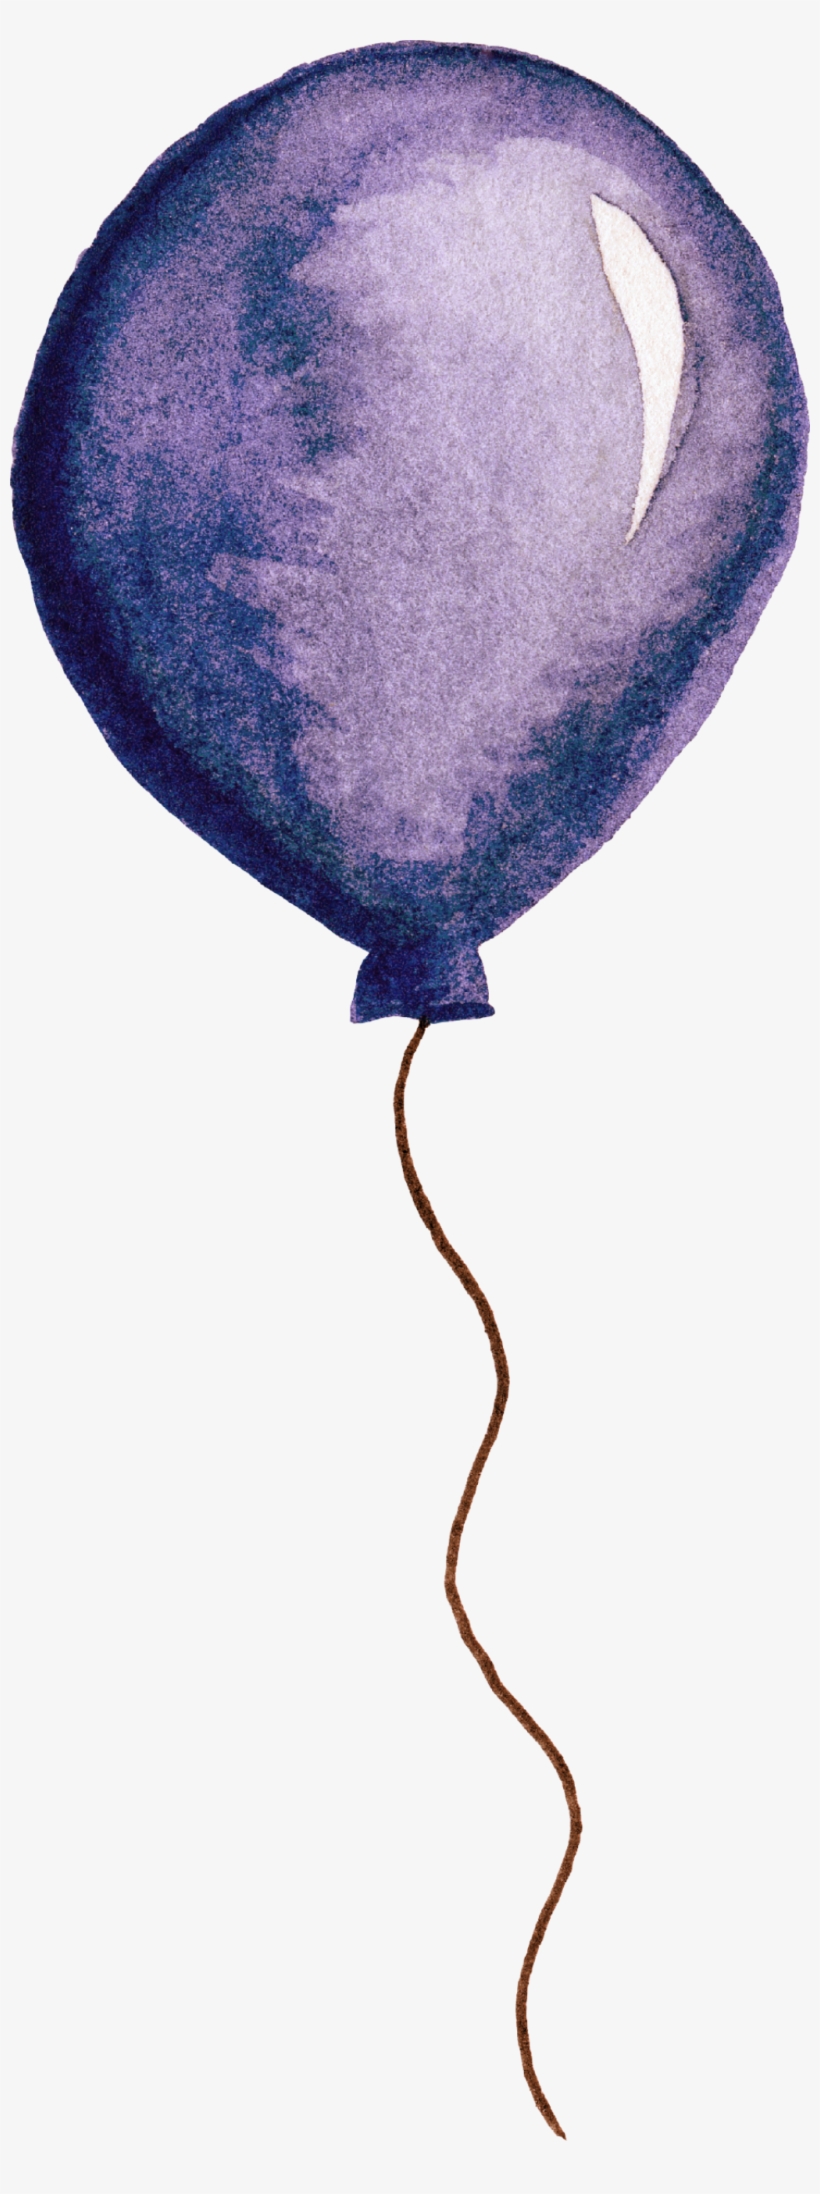 This Graphics Is Hand Painted A Purple Balloon Png - Portable Network Graphics, transparent png #21393